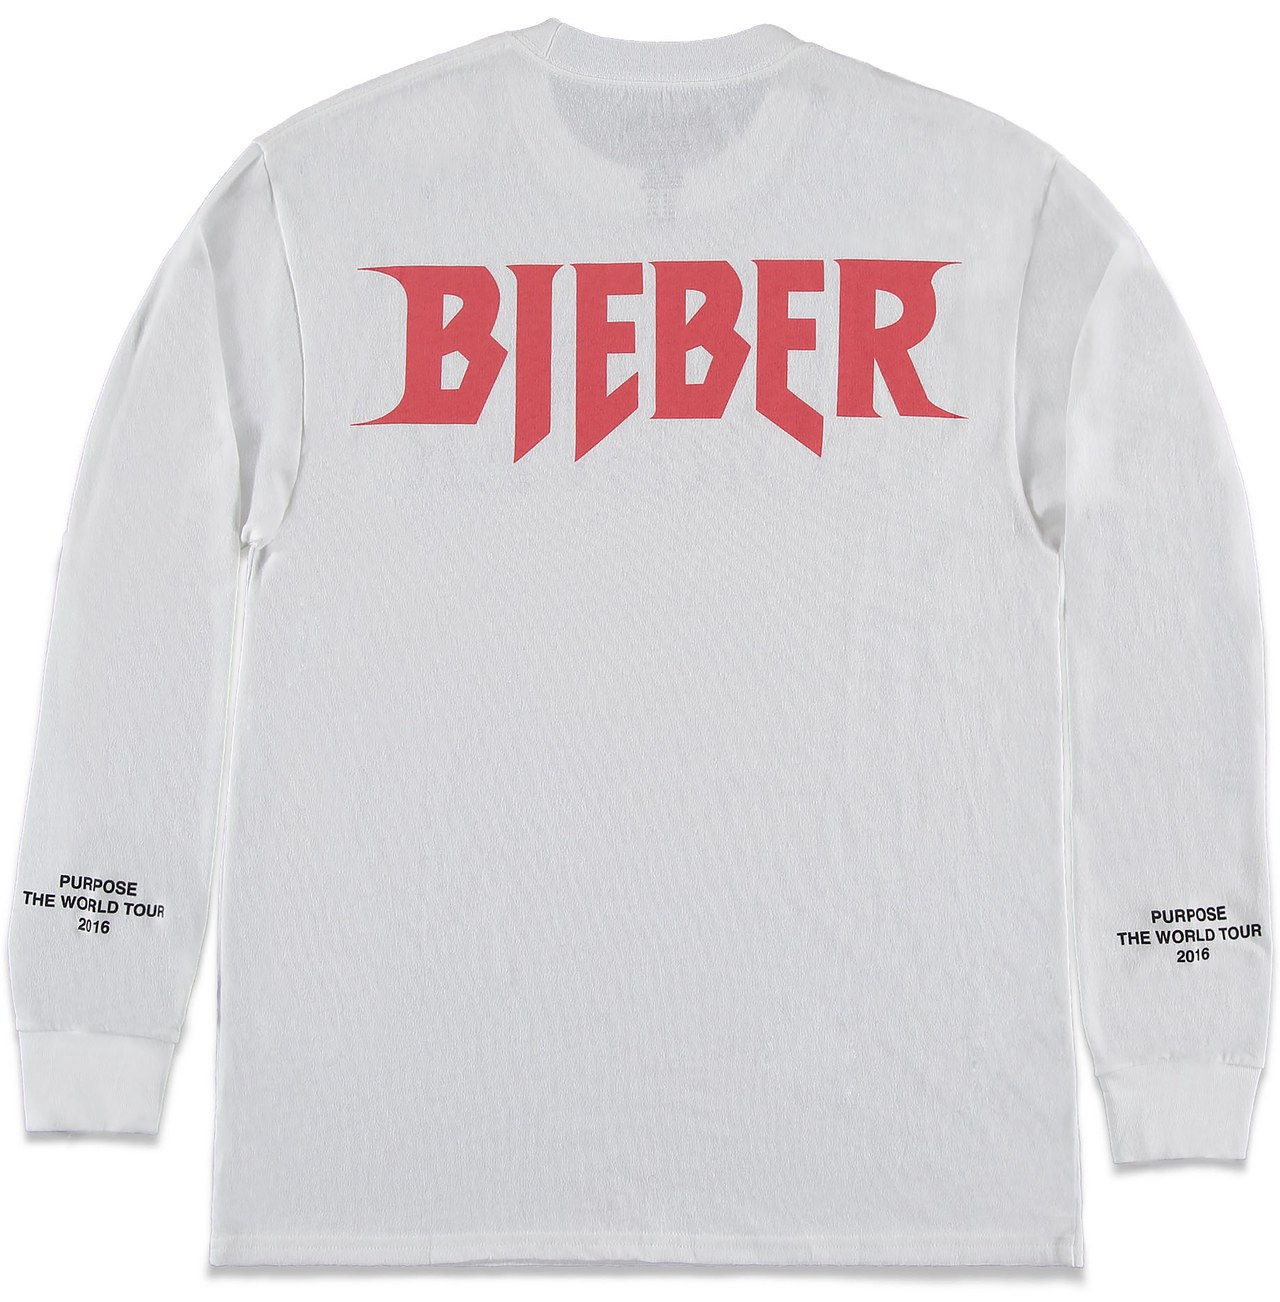 Long-sleeve T-shirt, [$20](http://www.forever21.com/Product/Product.aspx?BR=f21&Category=promo-purpose-tour&ProductID=2000231543&VariantID=012)